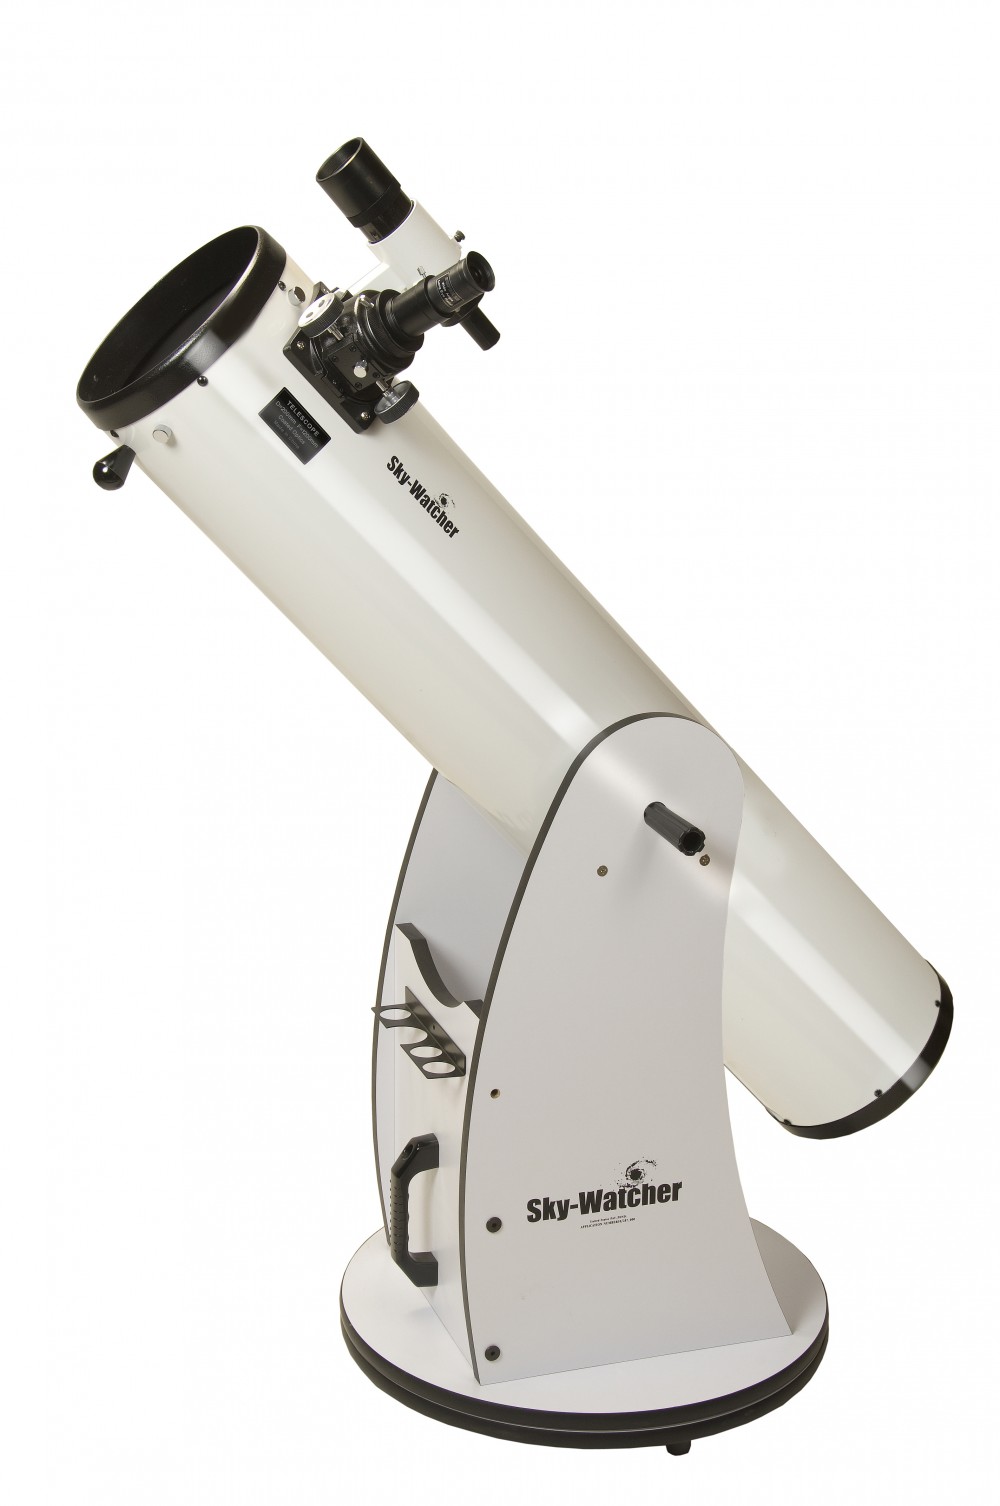 Skywatcher Skyliner 200p Dobsonian Telescope - Modern Astronomy Are Dobsonian Telescopes Good For Astrophotography